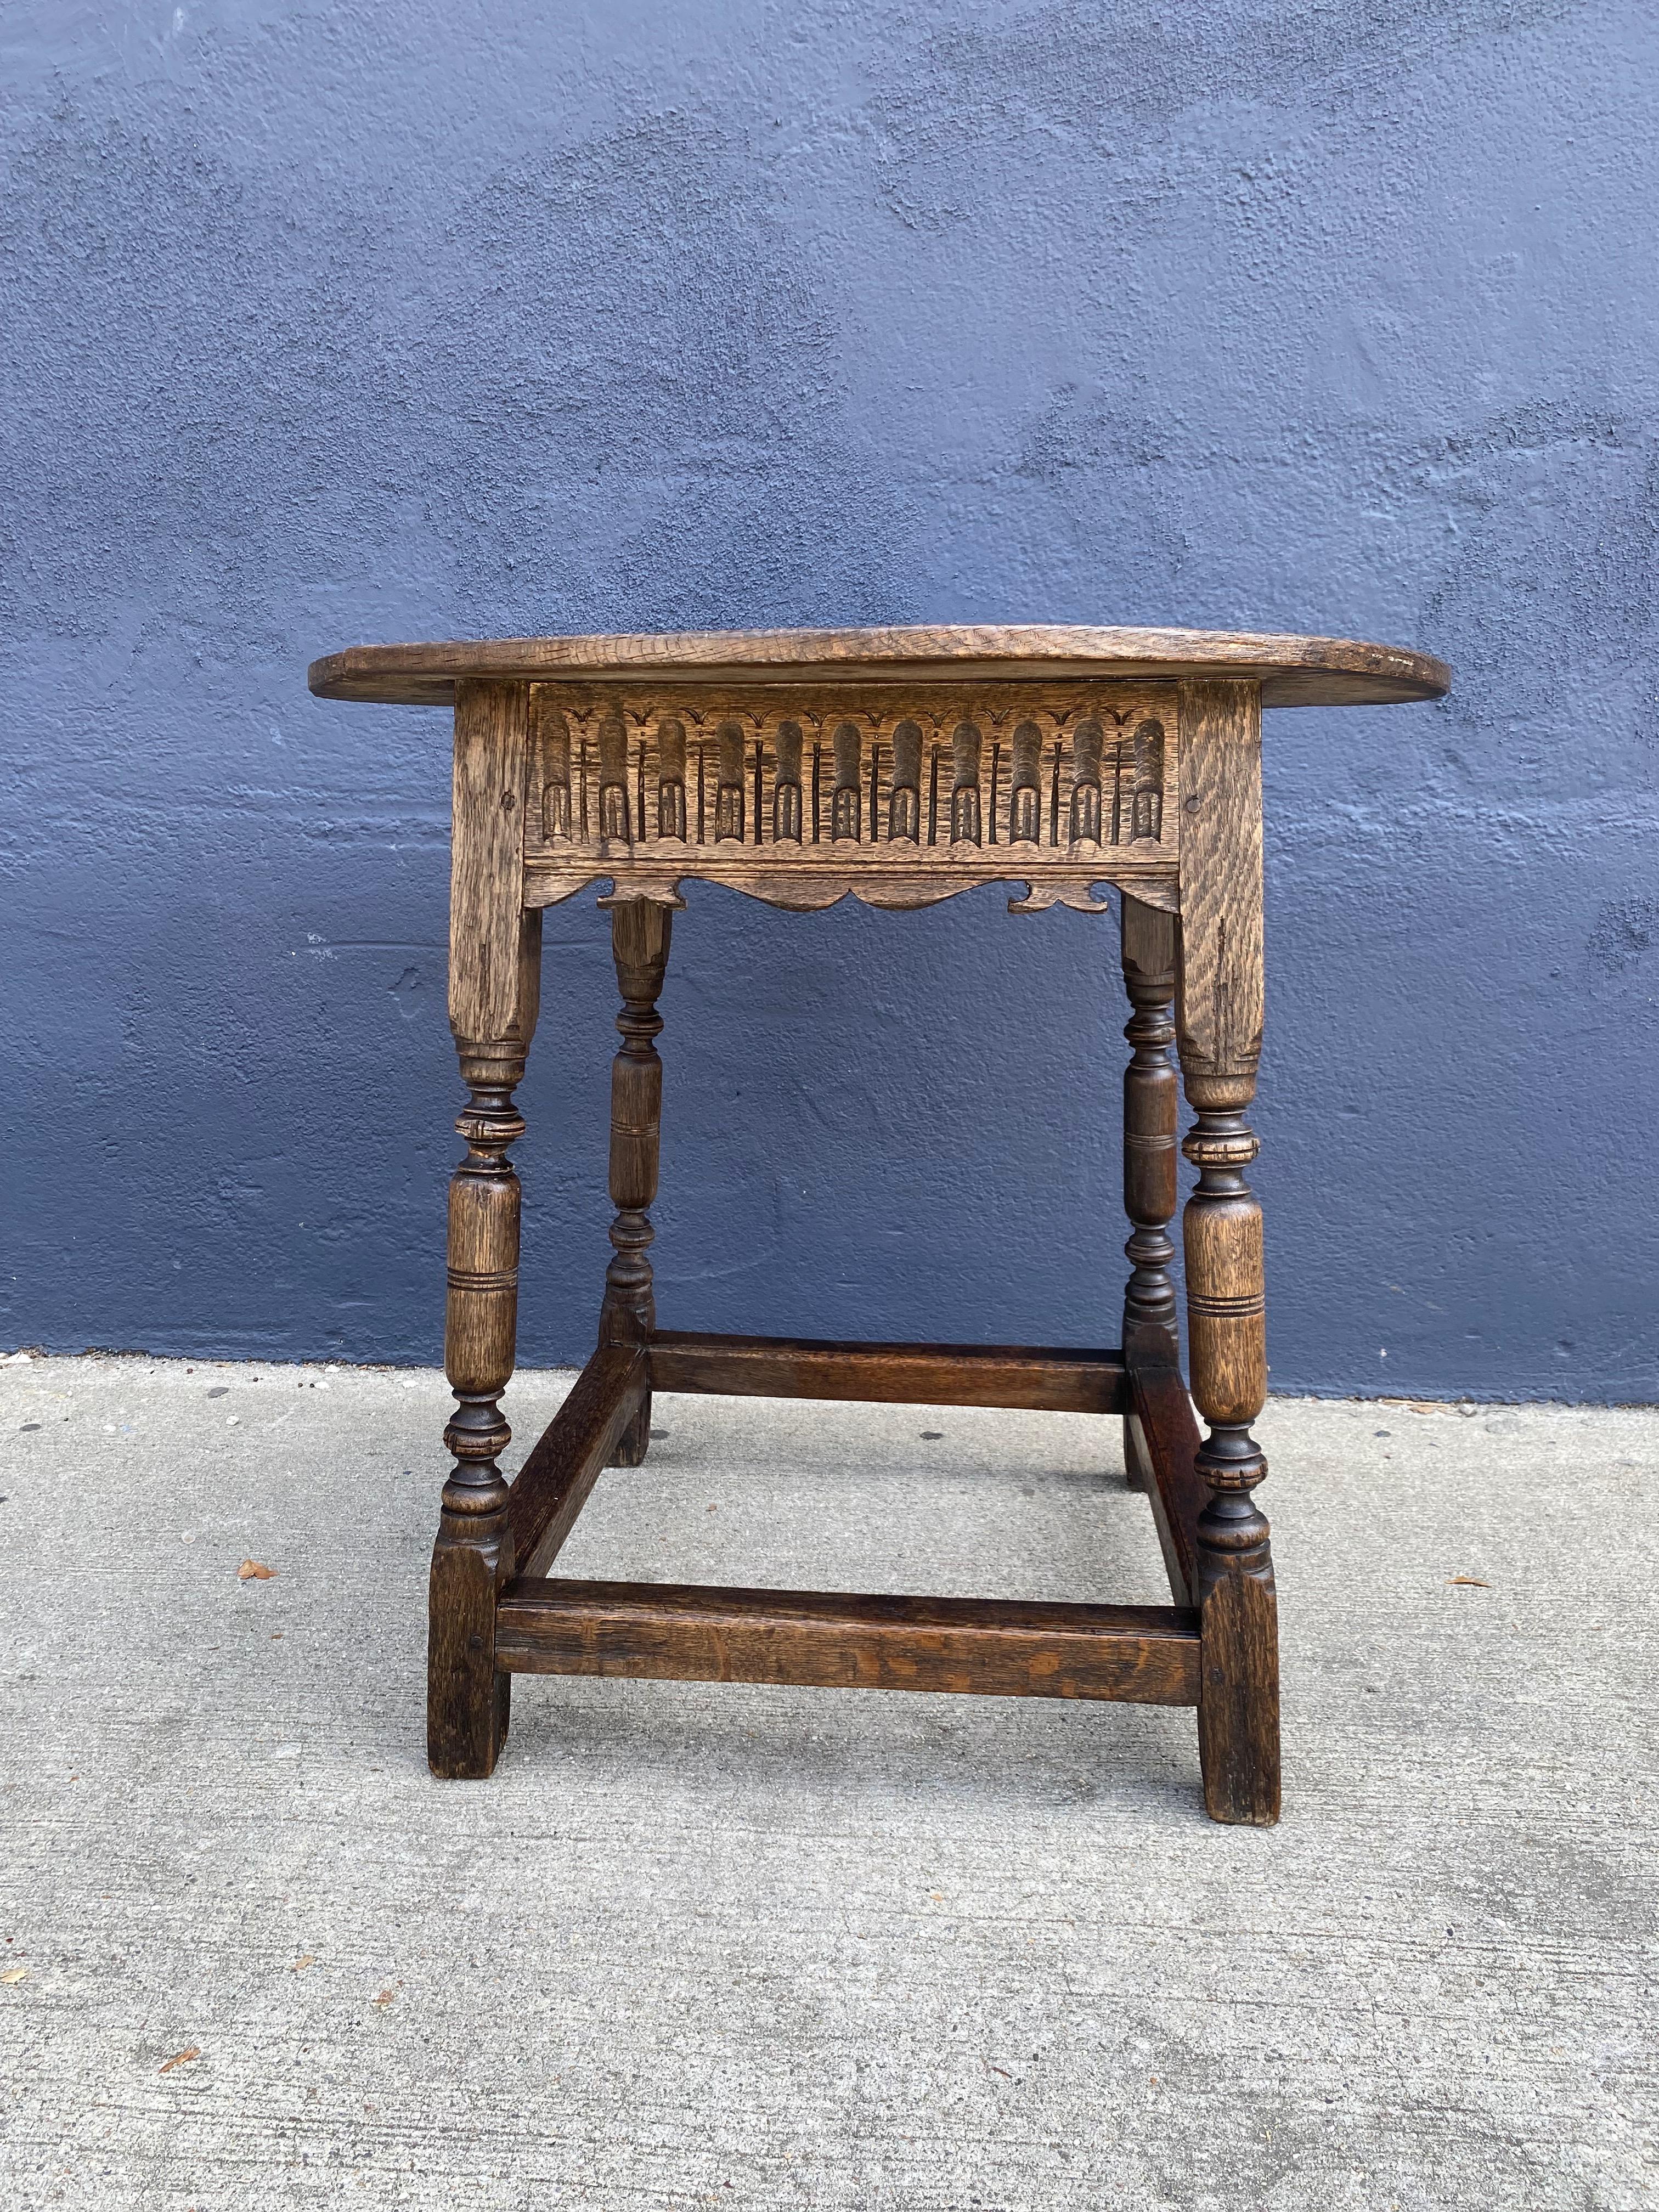 This is a very good example of a late Jacobean carved oak Tavern table. The generous 30 inch round top is an unusual feature as the majority of tavern tables were of square or rectangular form. The table was at one point in its life ebonized; traces